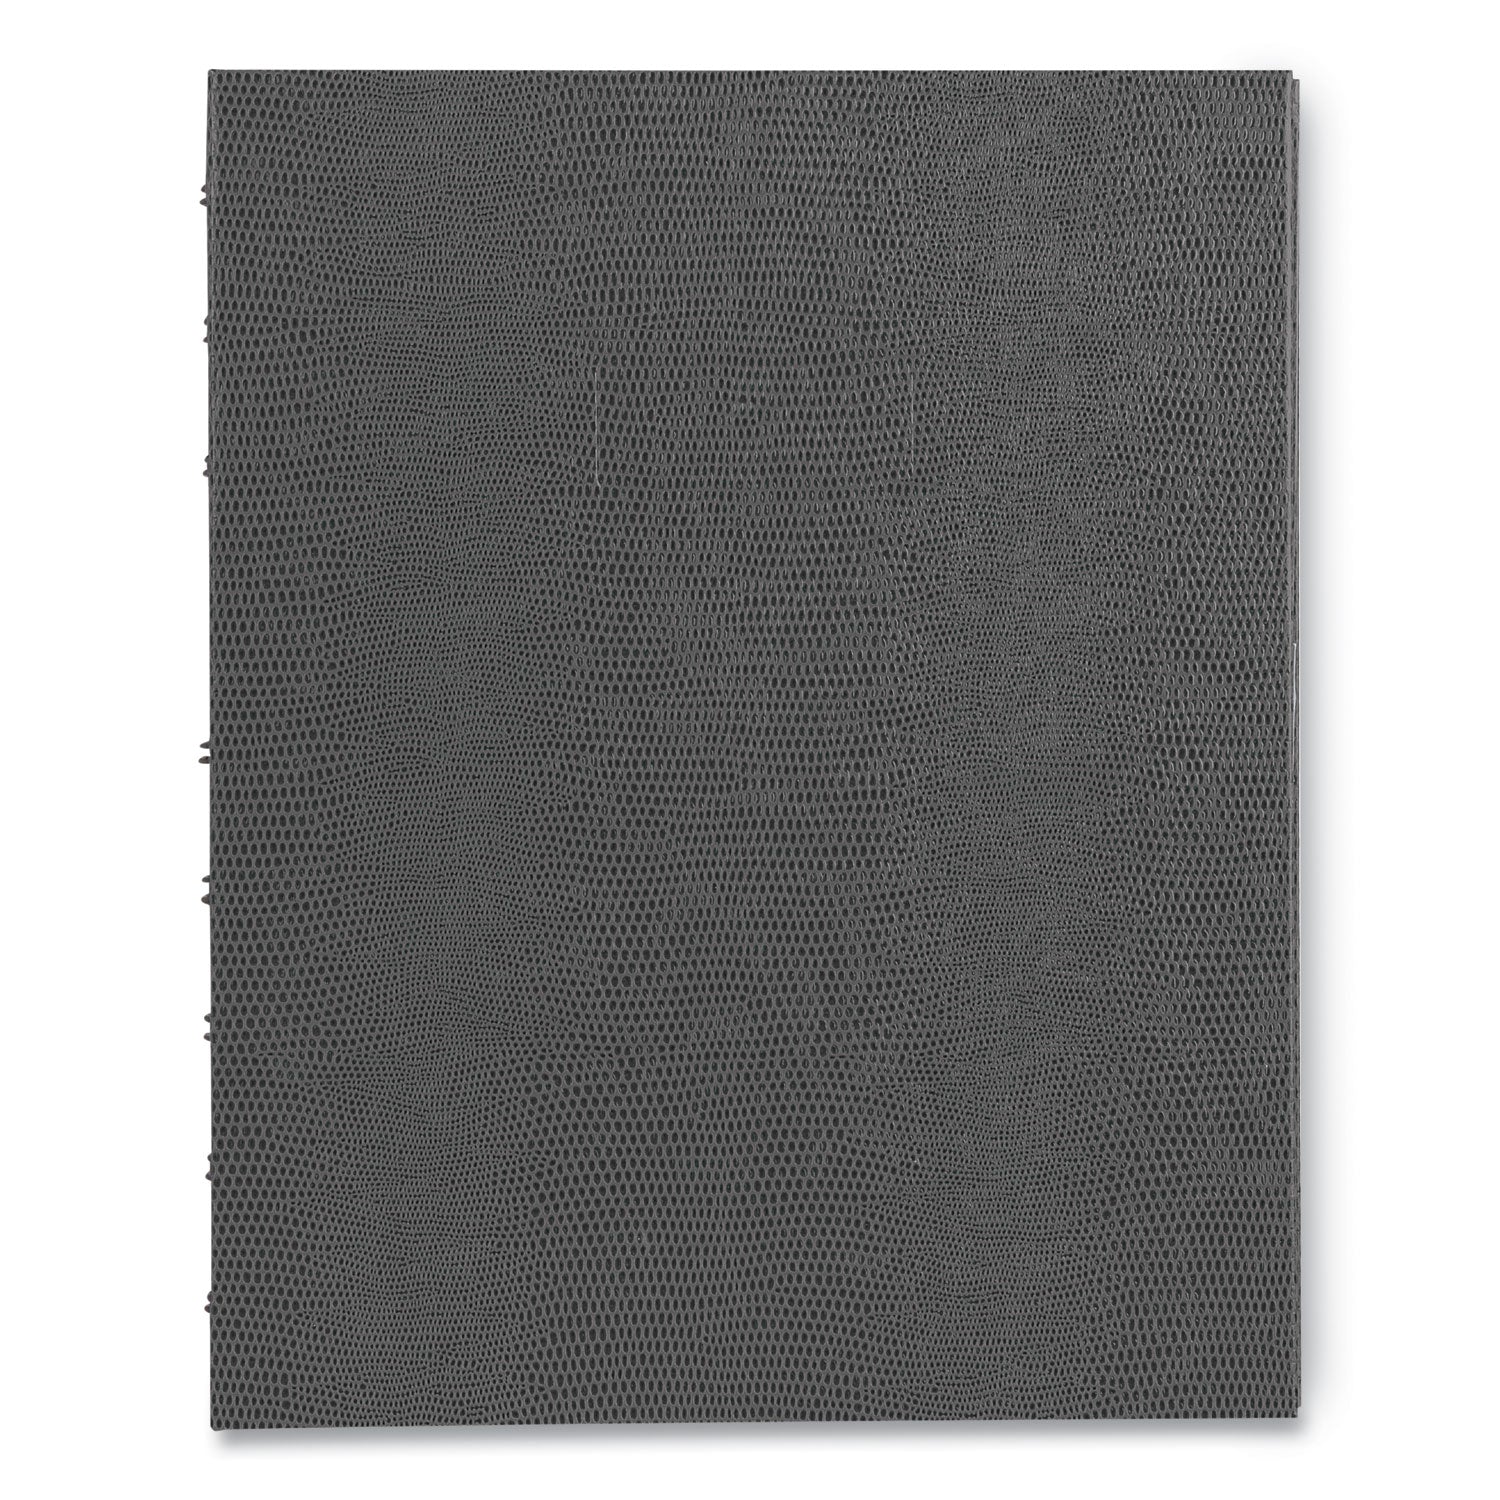 notepro-notebook-1-subject-medium-college-rule-cool-gray-cover-75-925-x-725-sheets_reda7150gry - 5